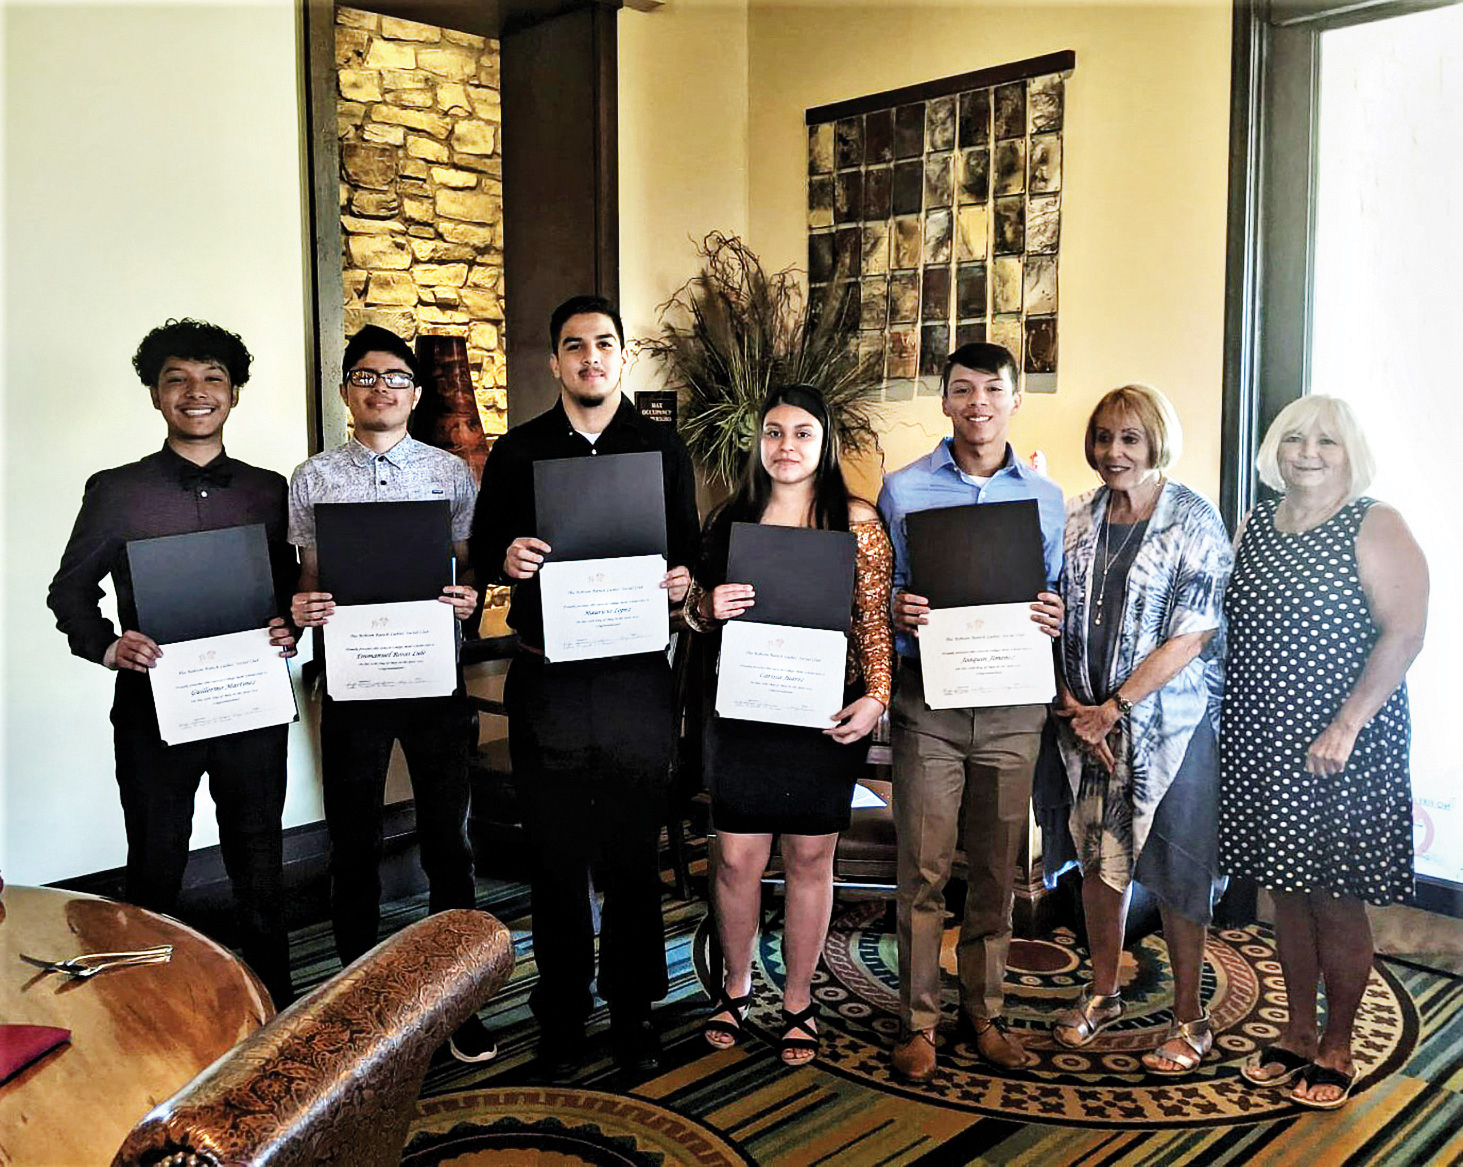 The scholarship recipients pose with the club chairs (left to right): Guillermo Martinez, Emmanuel Lule, Mauricio Lopez, Carissa Juarez, Joaquin Jimenez, Ruby Herman, and Debbie Maxwell.